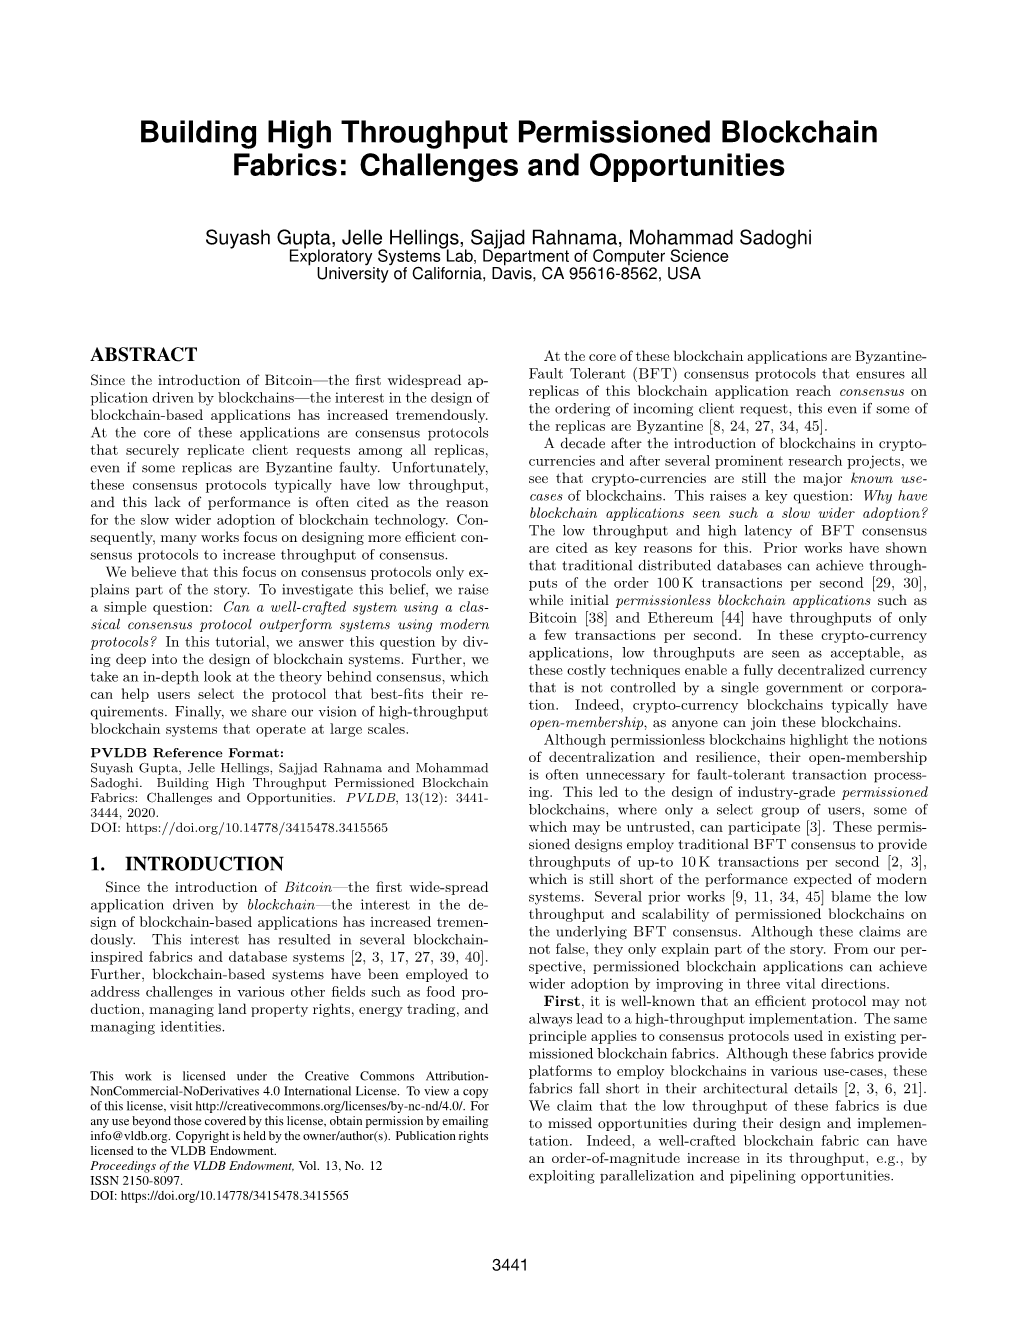 Building High Throughput Permissioned Blockchain Fabrics: Challenges and Opportunities